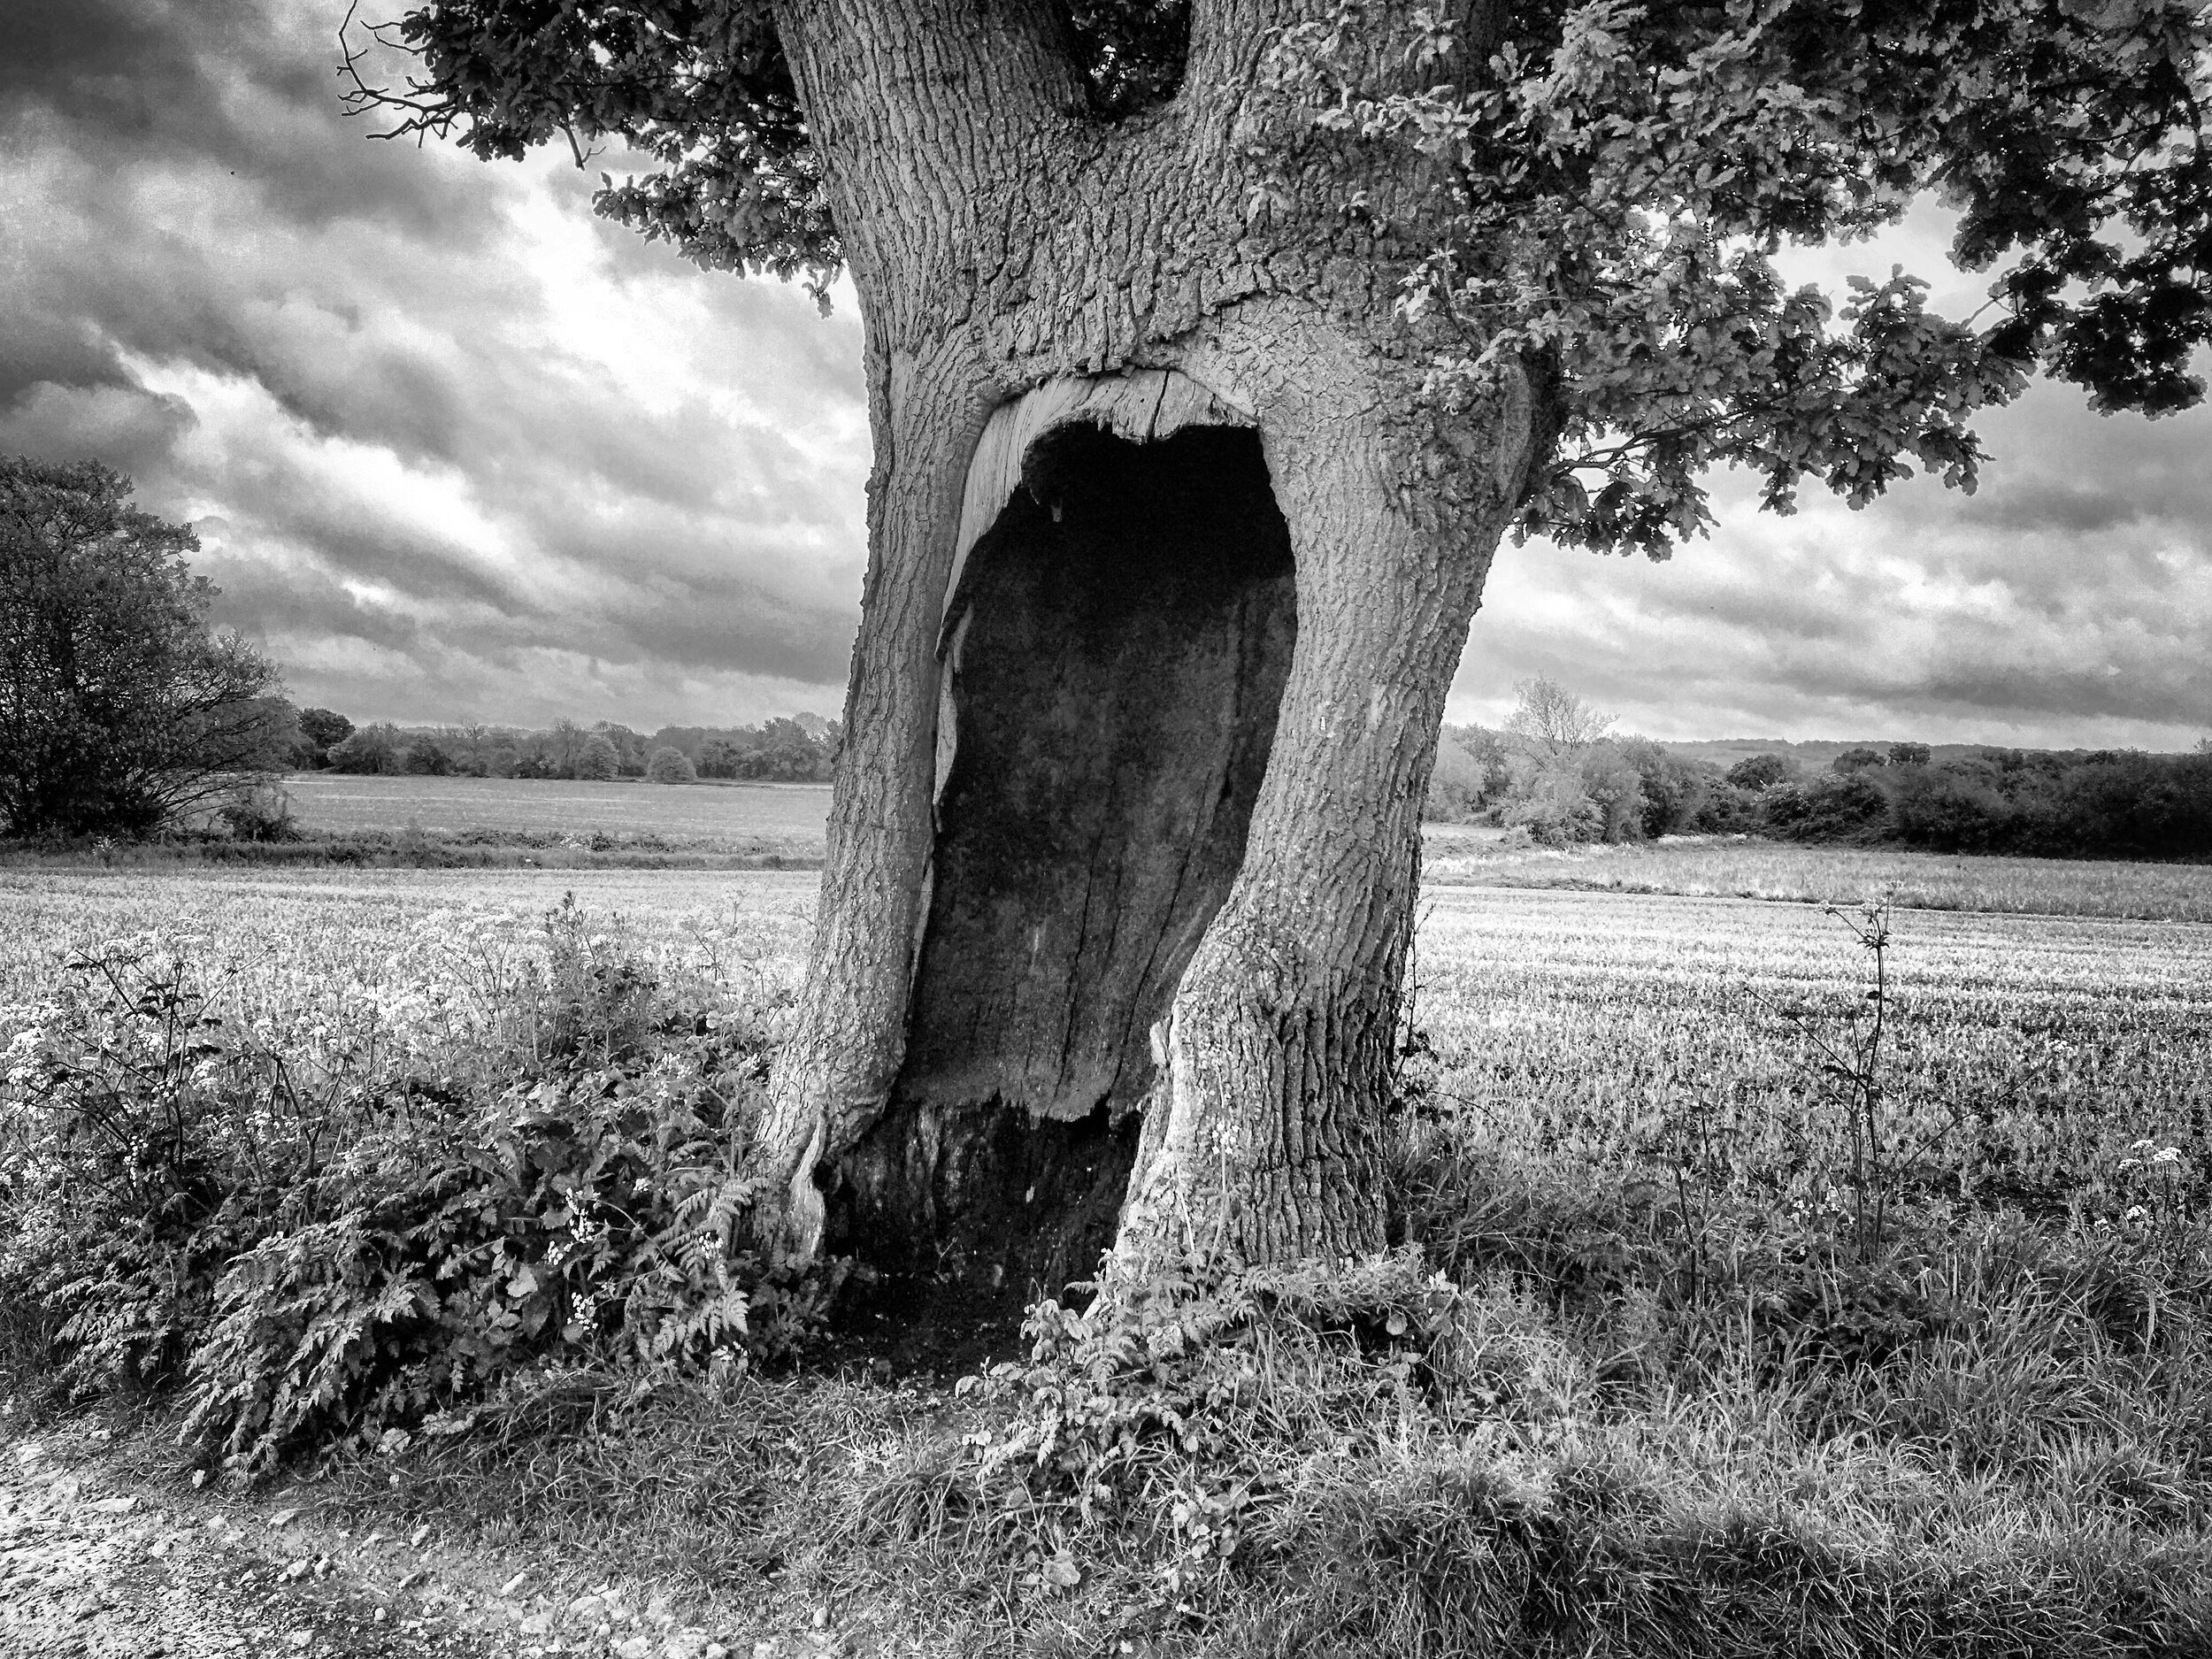 The hollow tree